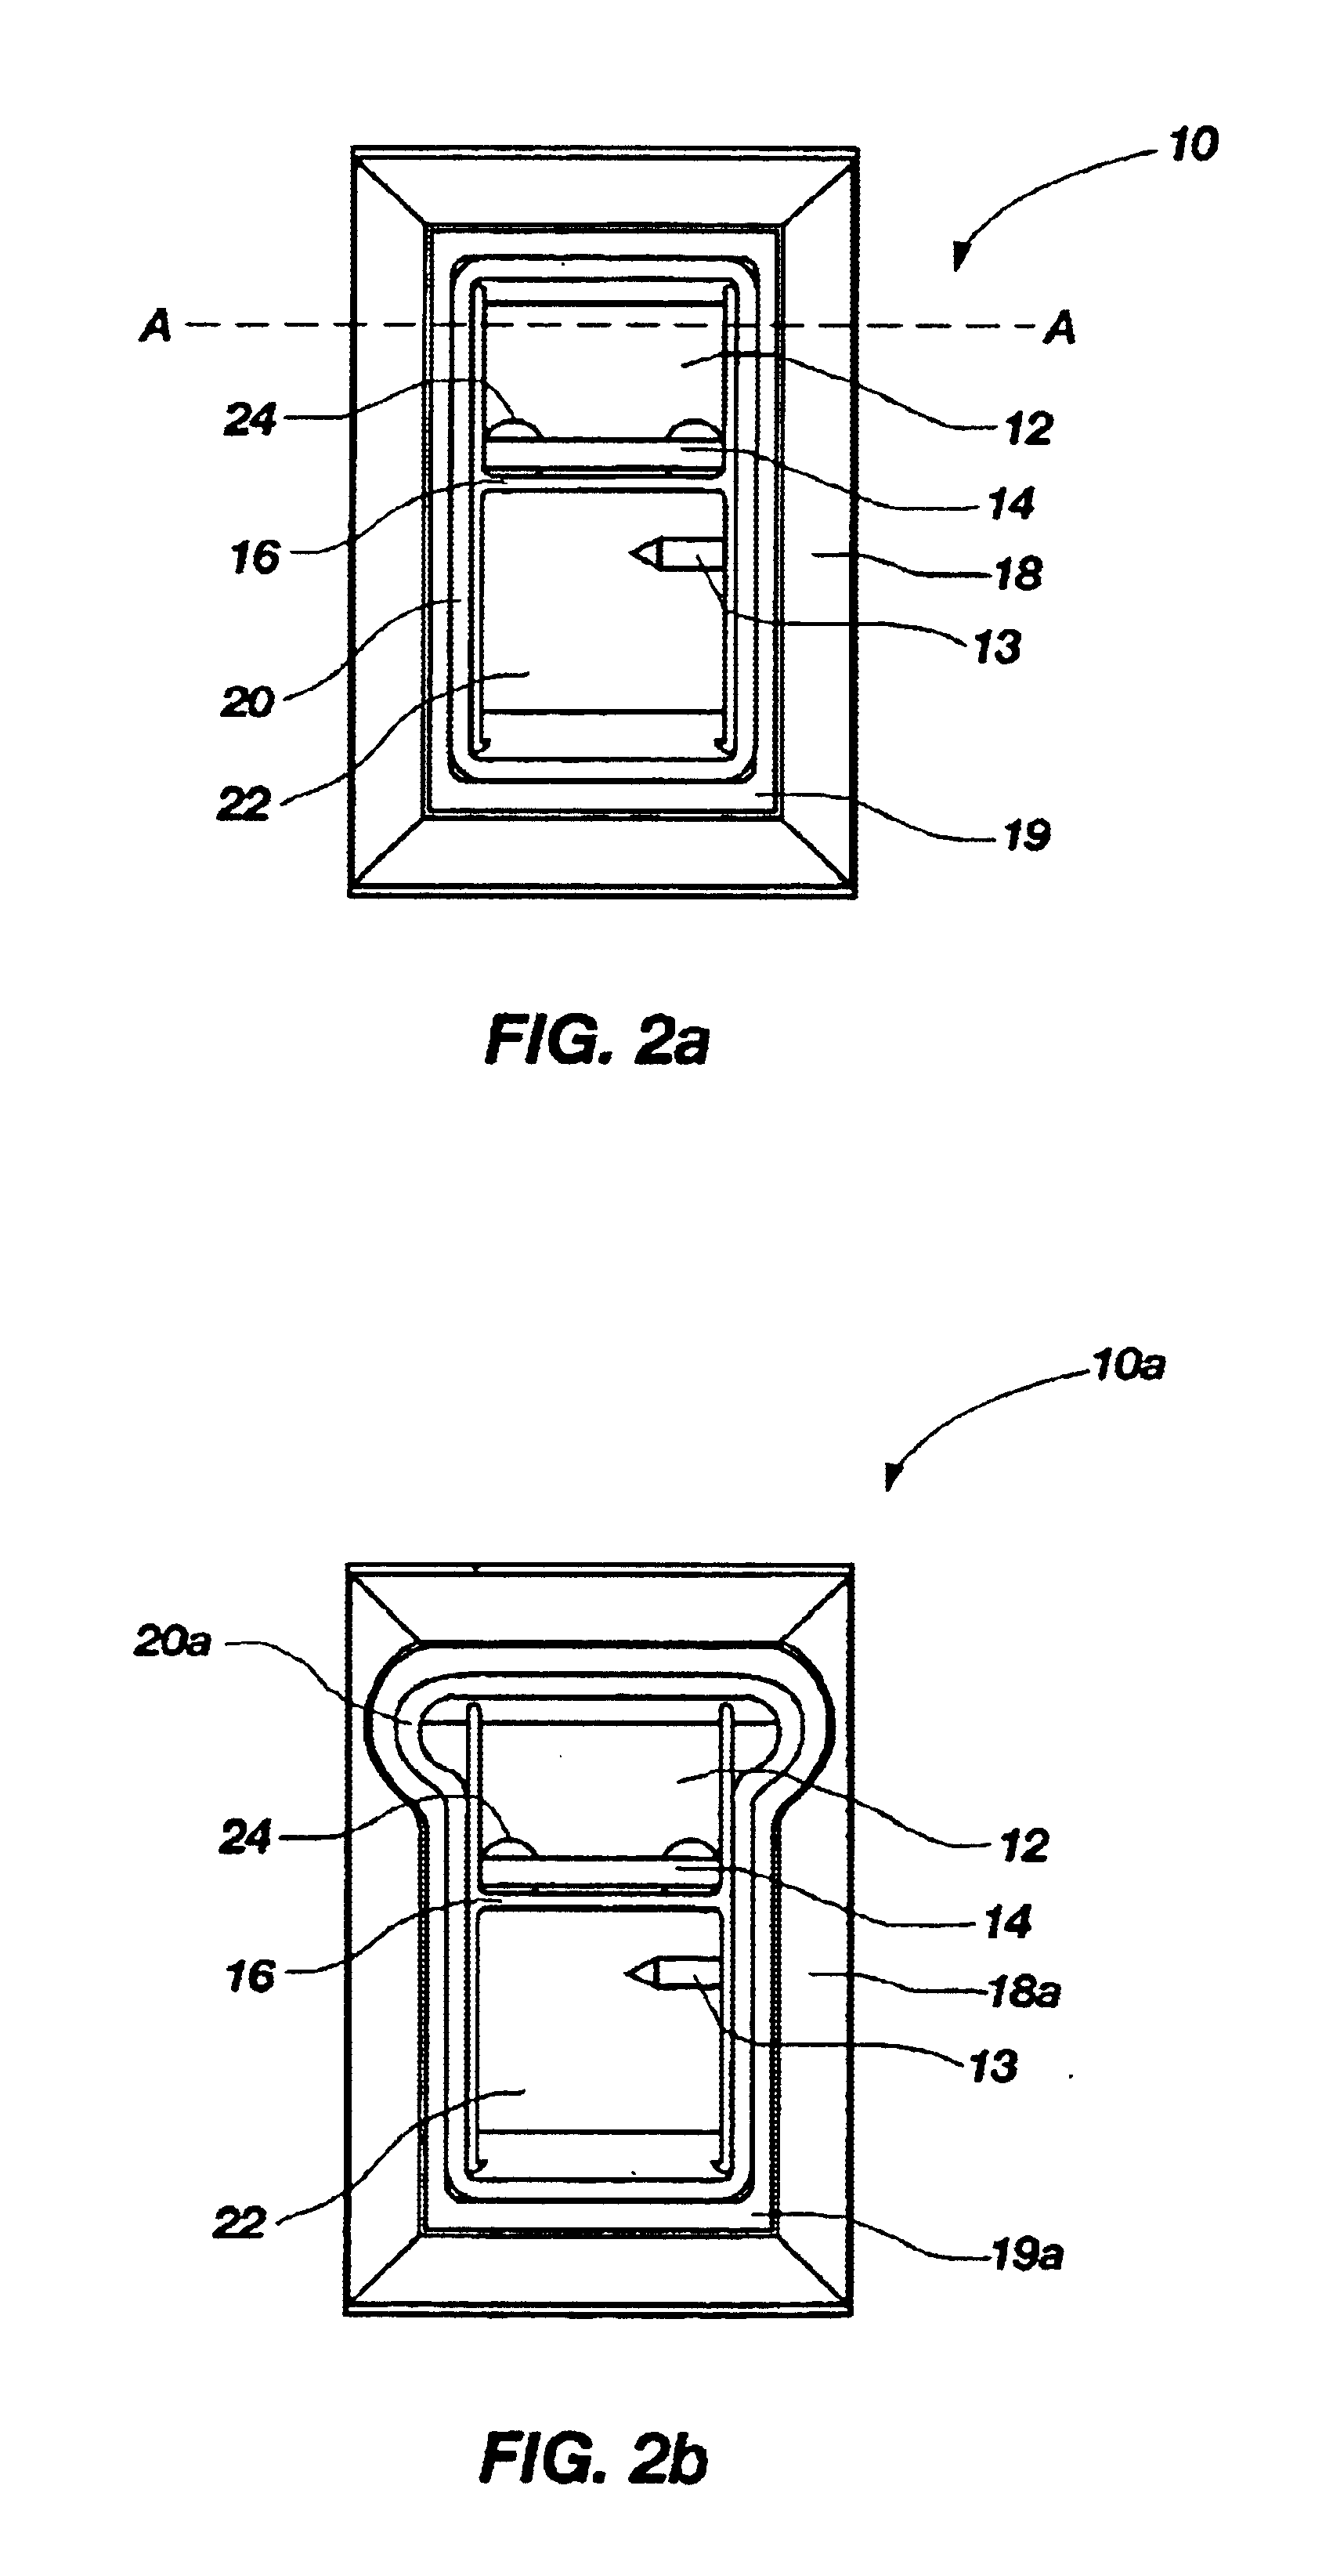 Bracket assembly for connecting rails of various configurations to a support structure